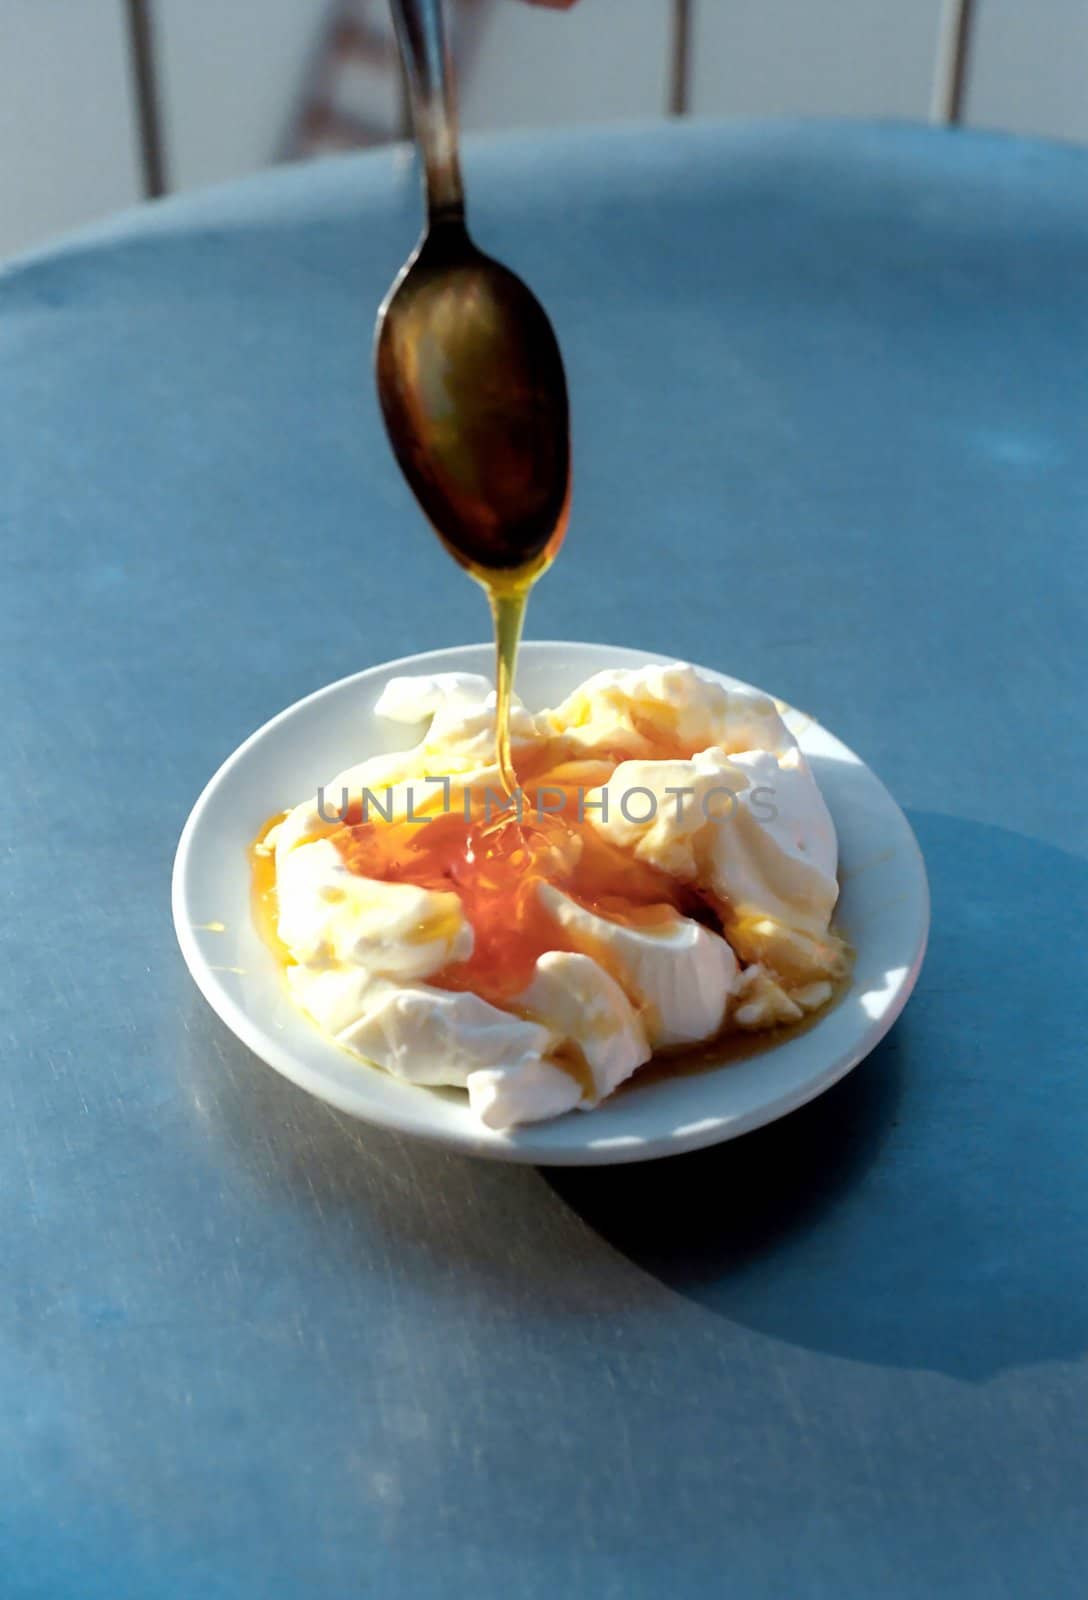 Plate with yoghurt and honey flowing down from spoon